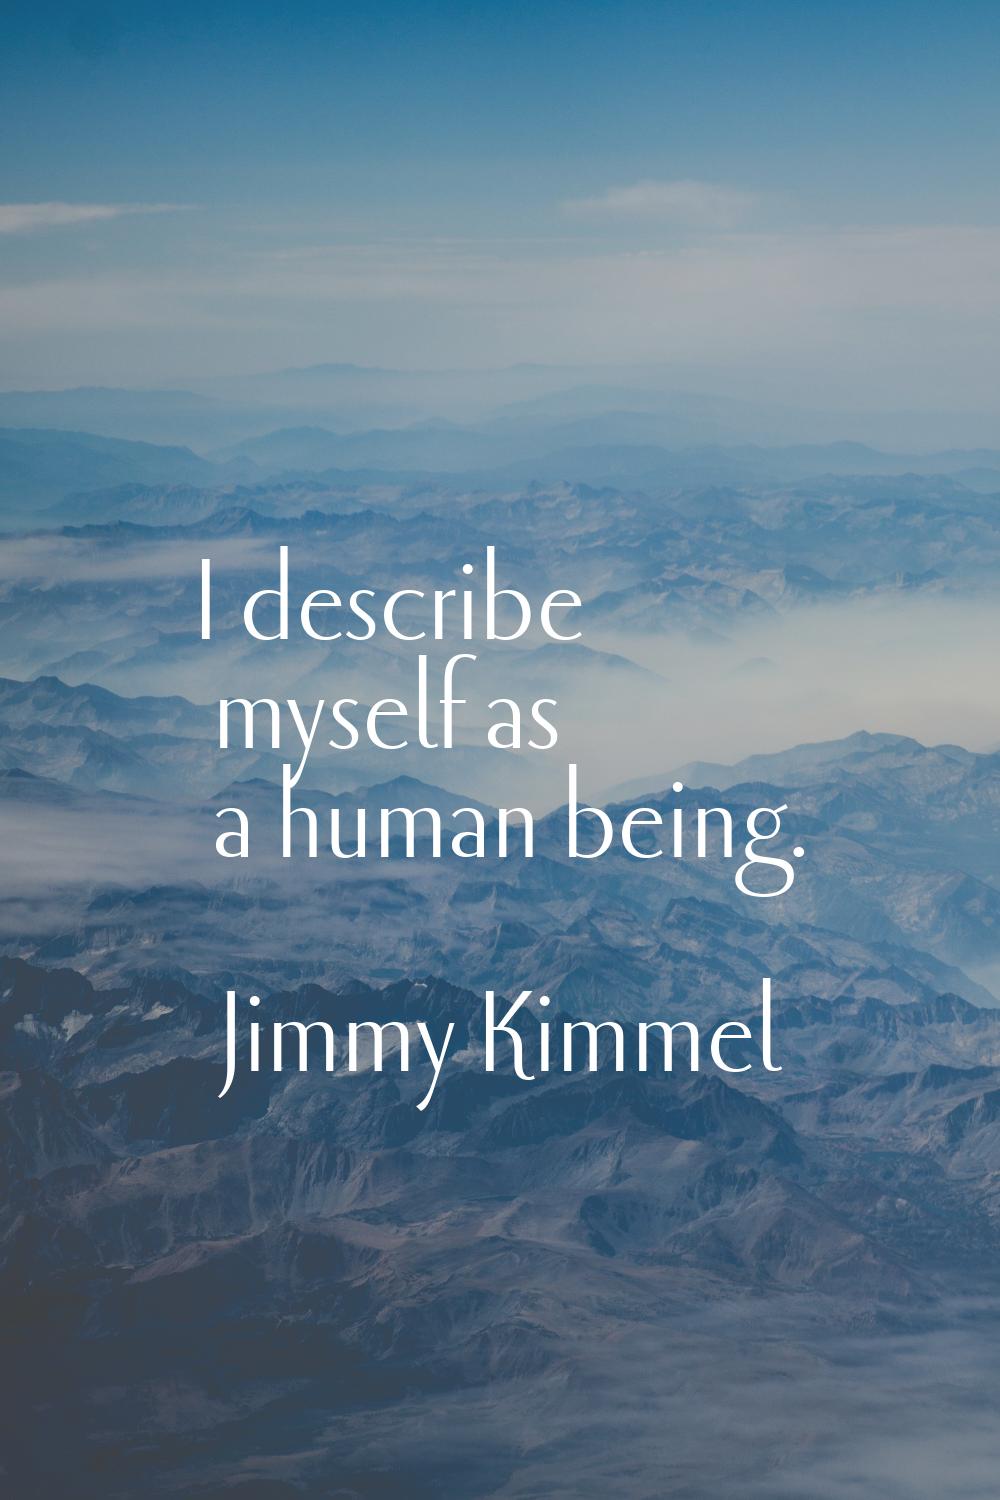 I describe myself as a human being.